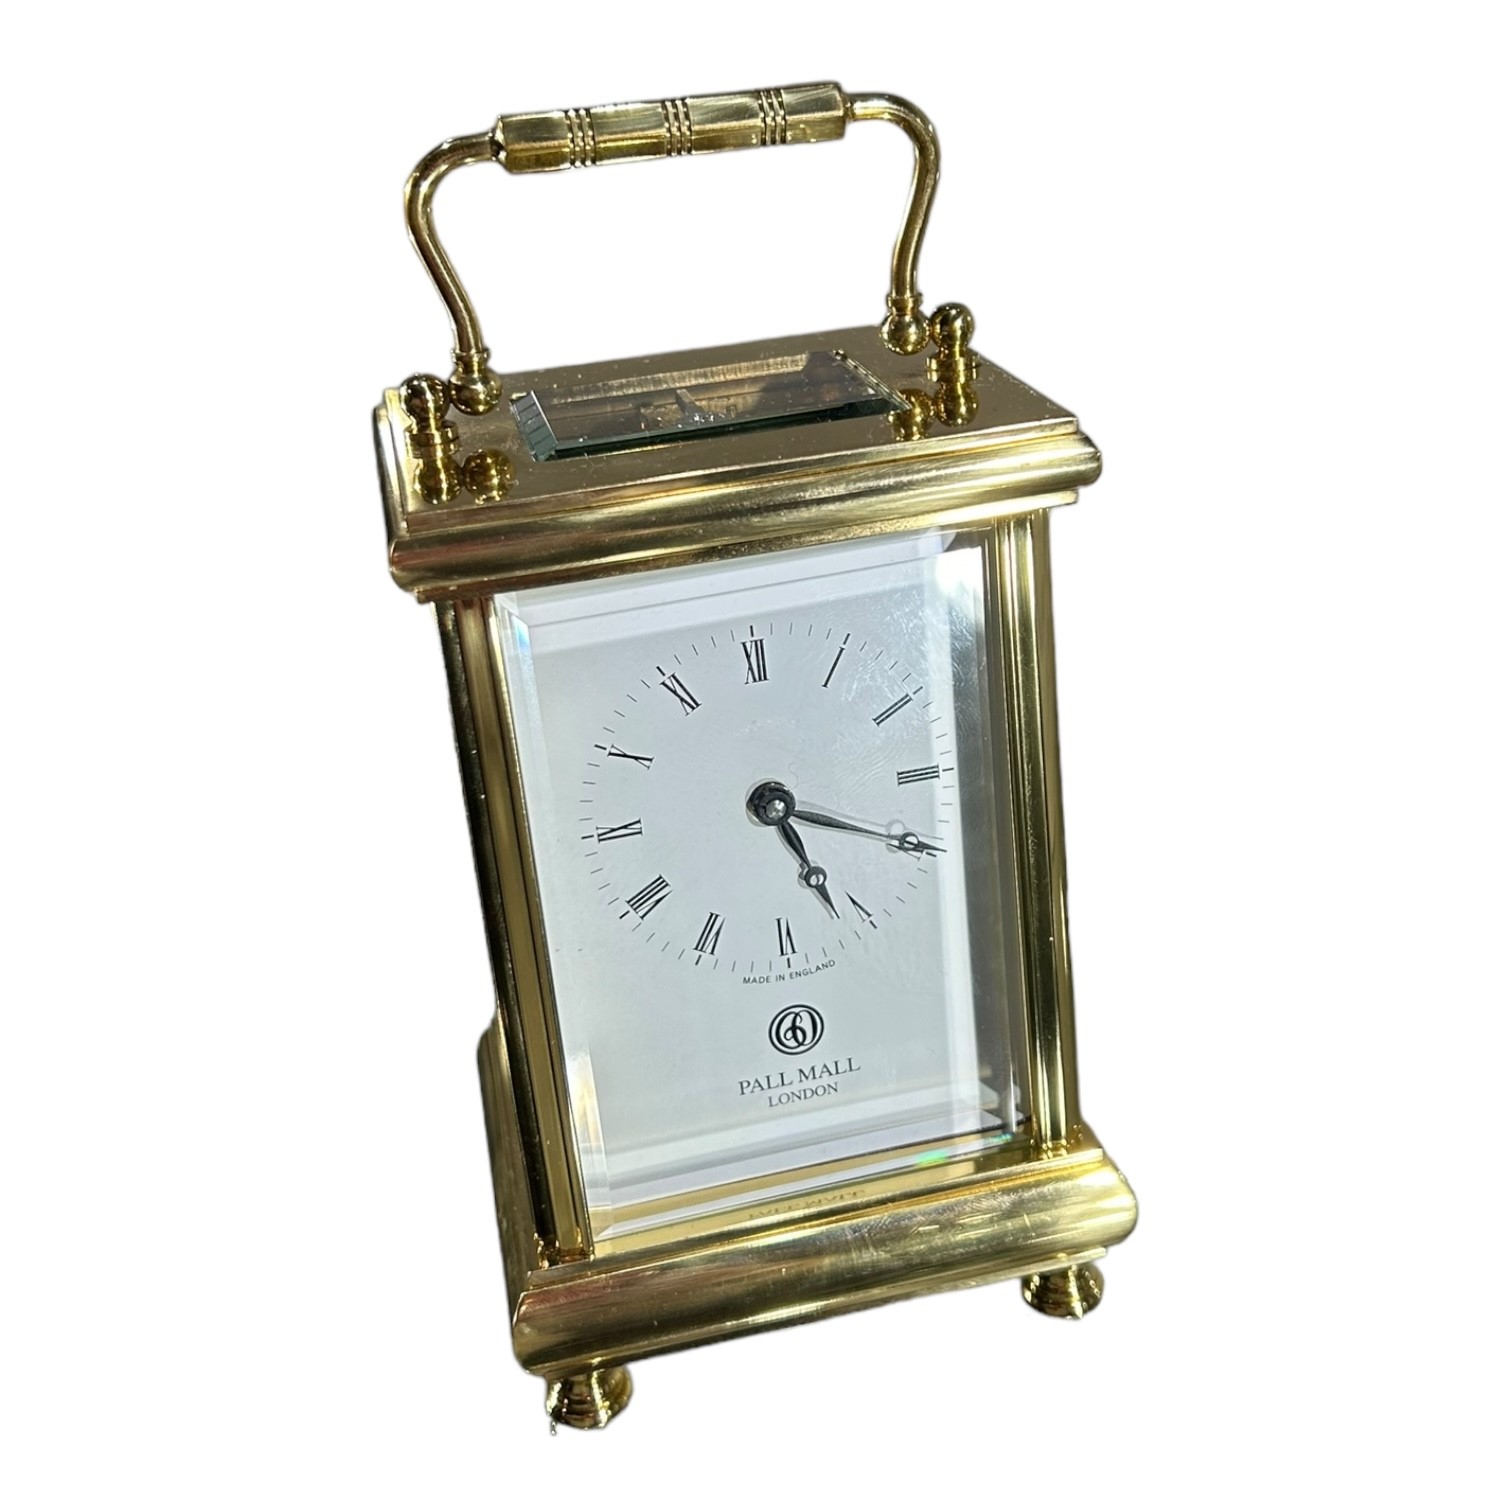 L'EPÉE FOR PALL MALL GOLDSMITHS, LONDON, AN EARLY 21ST CENTURY BRASS 8 DAY CARRIAGE CLOCK Having - Image 3 of 7